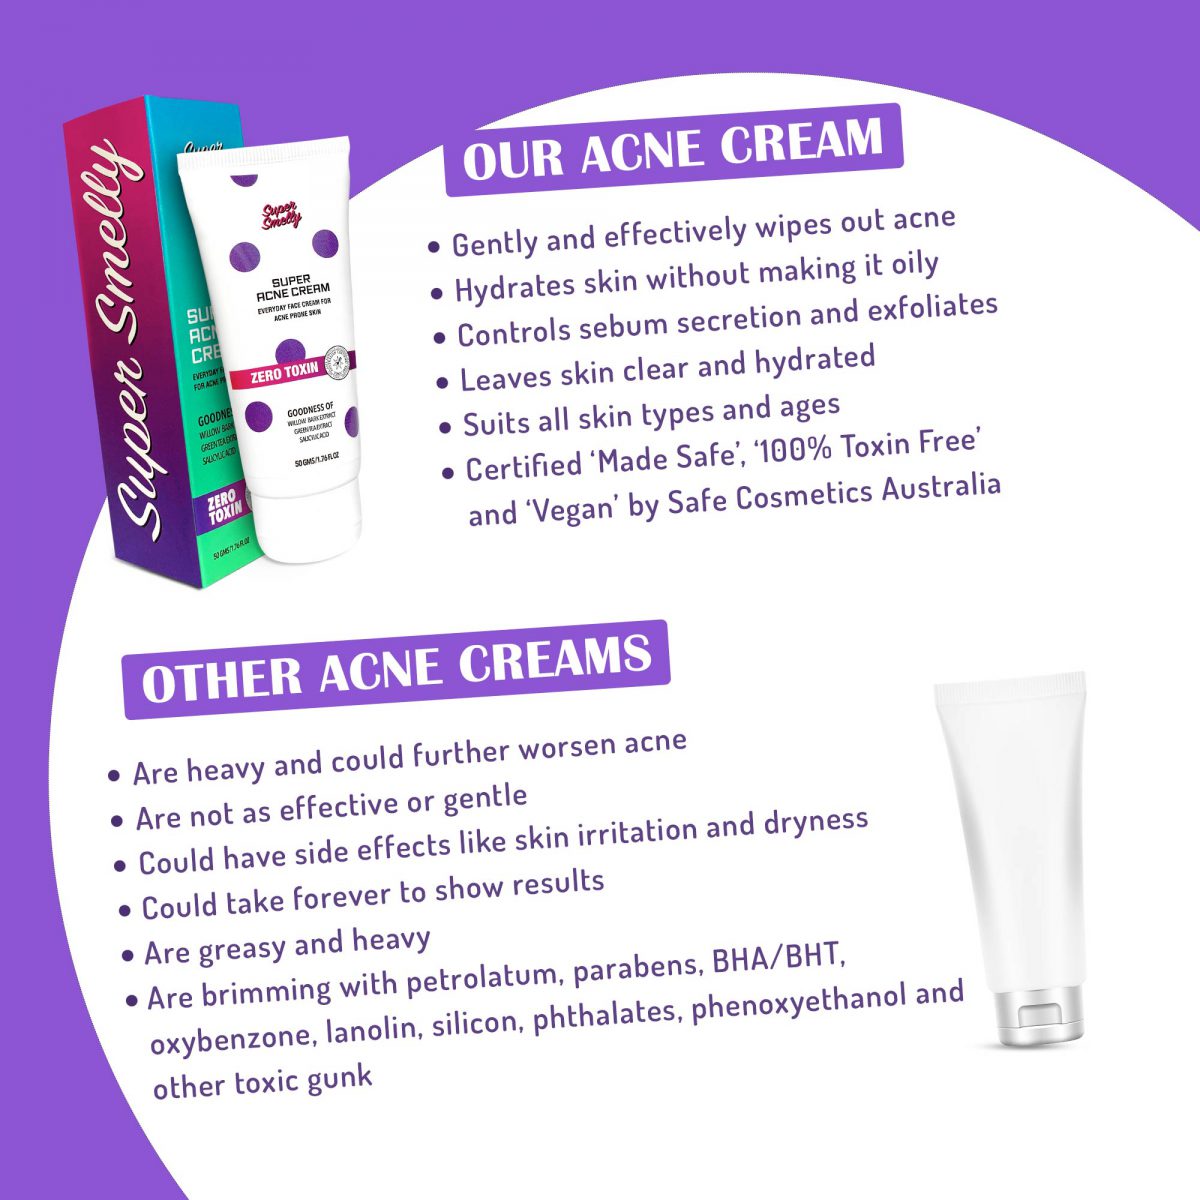 Chemical free acne face cream | Toxin free acne face cream | tea tree face cream for acne | supersmelly face cream | best cream for pimples and dark spots